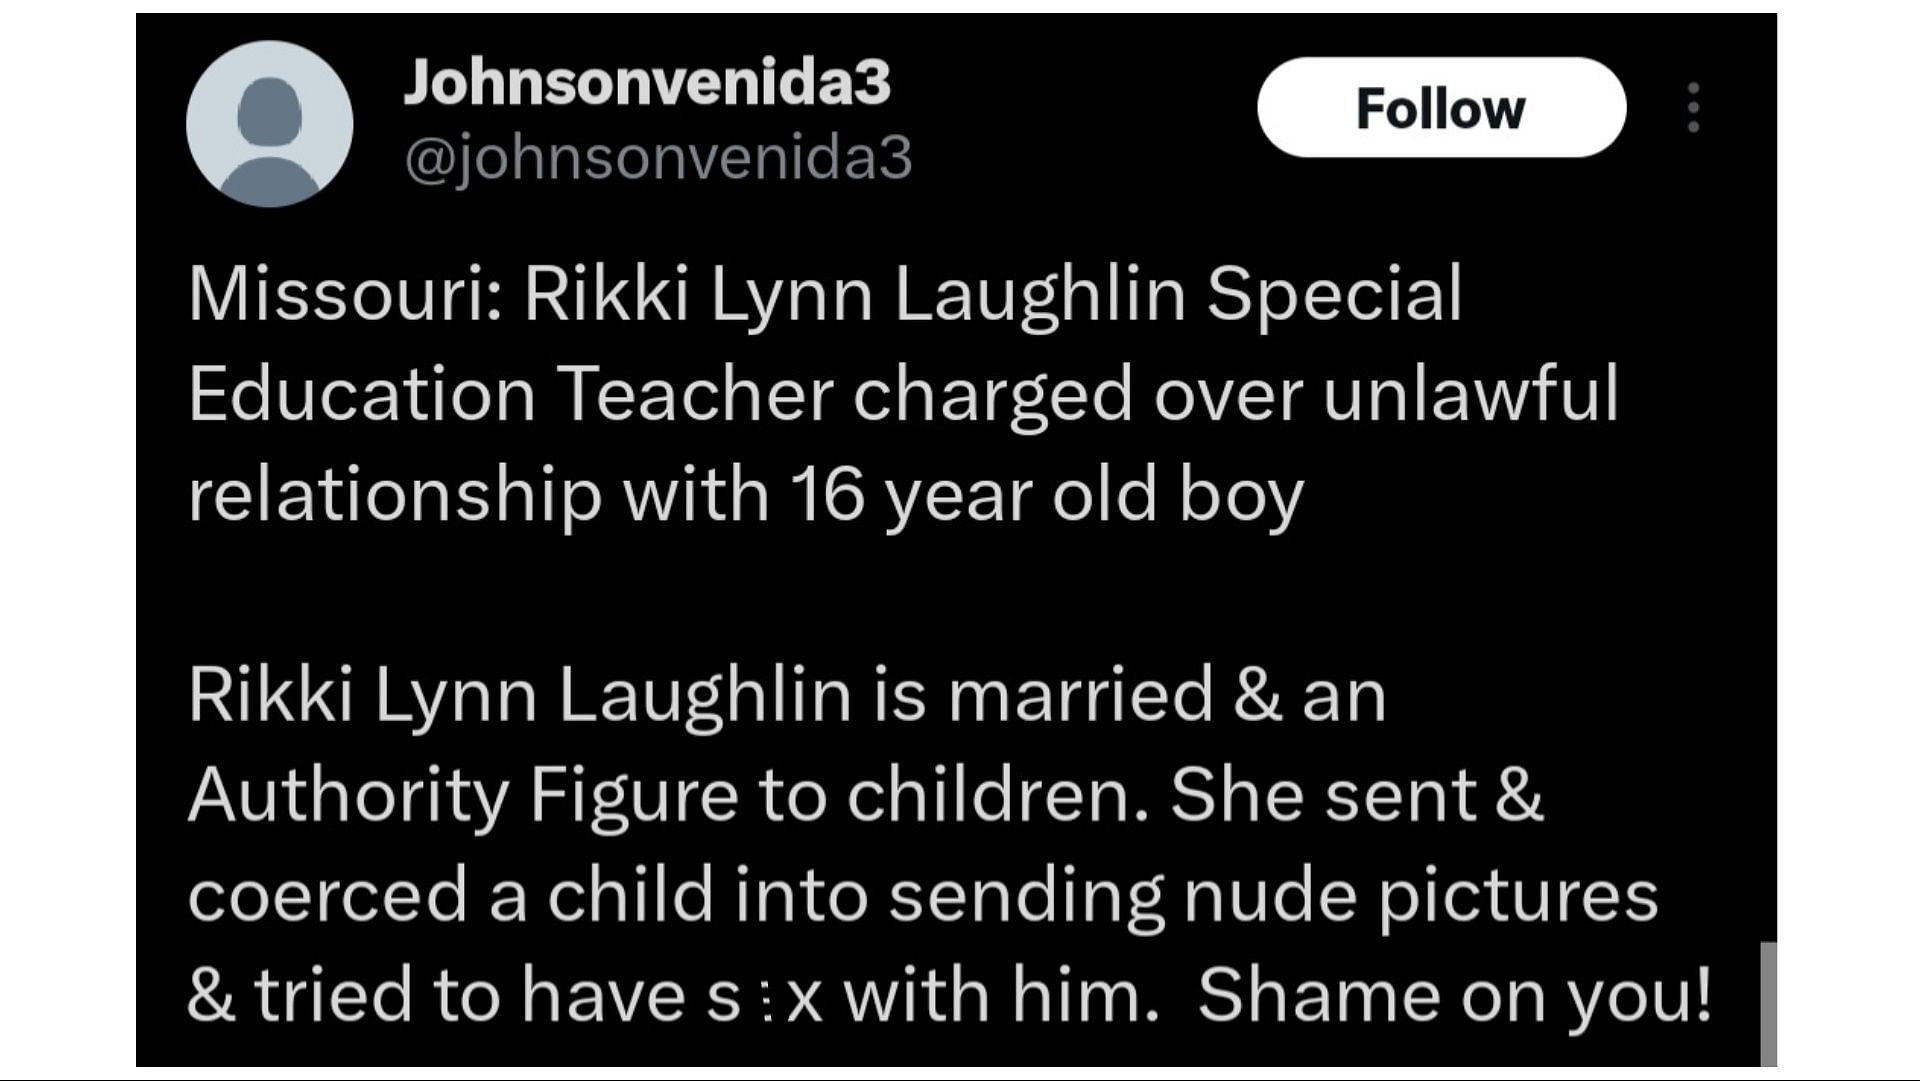 Laughlin has been accused of sending inappropriate images and videos to the teenager (Image via Johnsonvenida3/X)